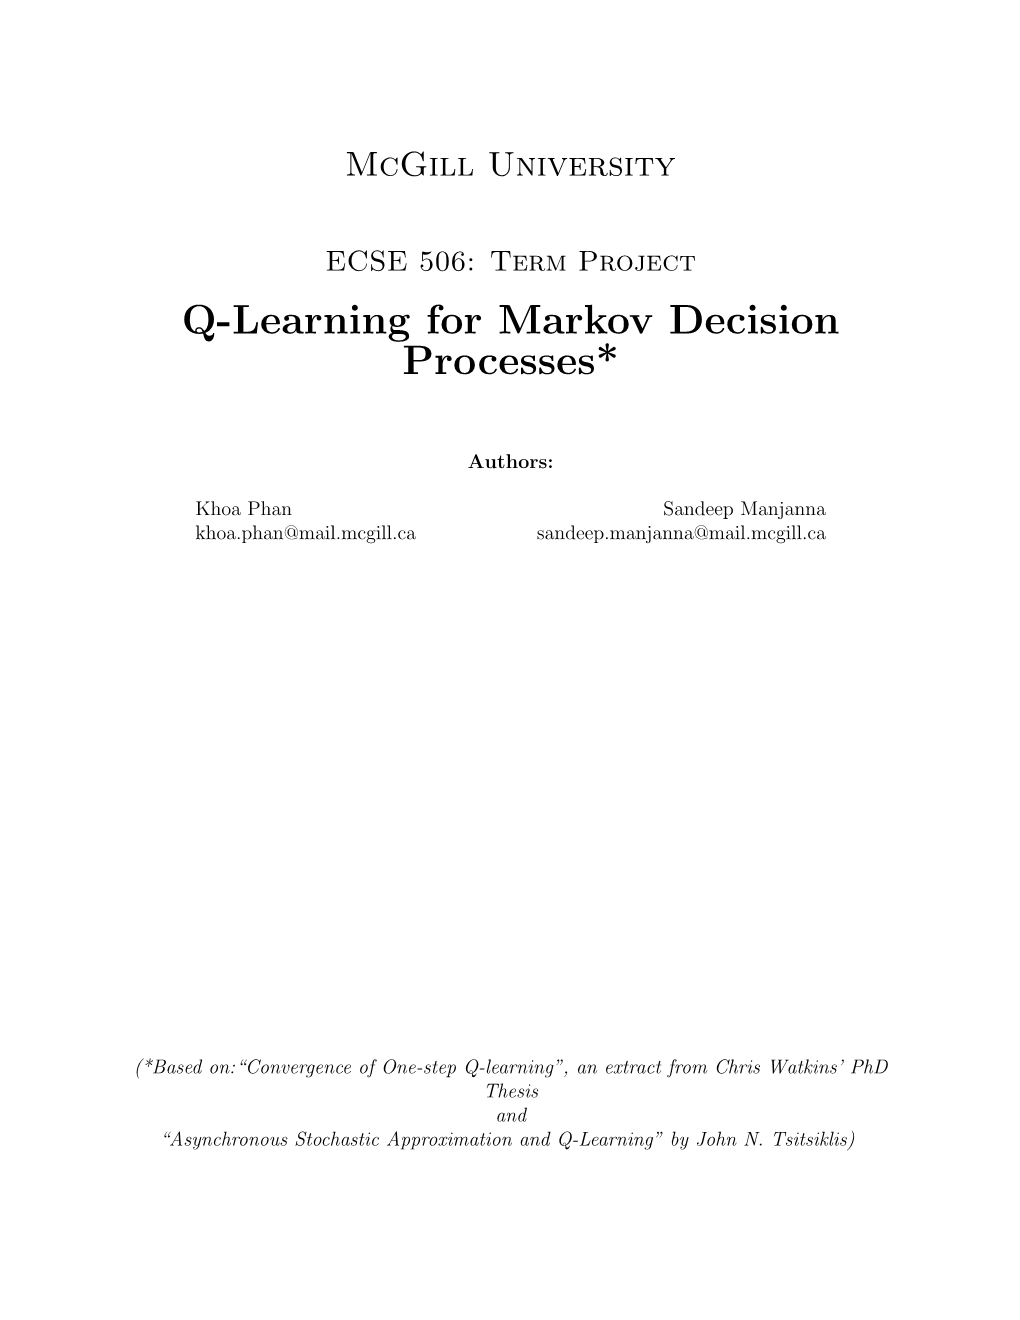 Q-Learning for Markov Decision Processes*